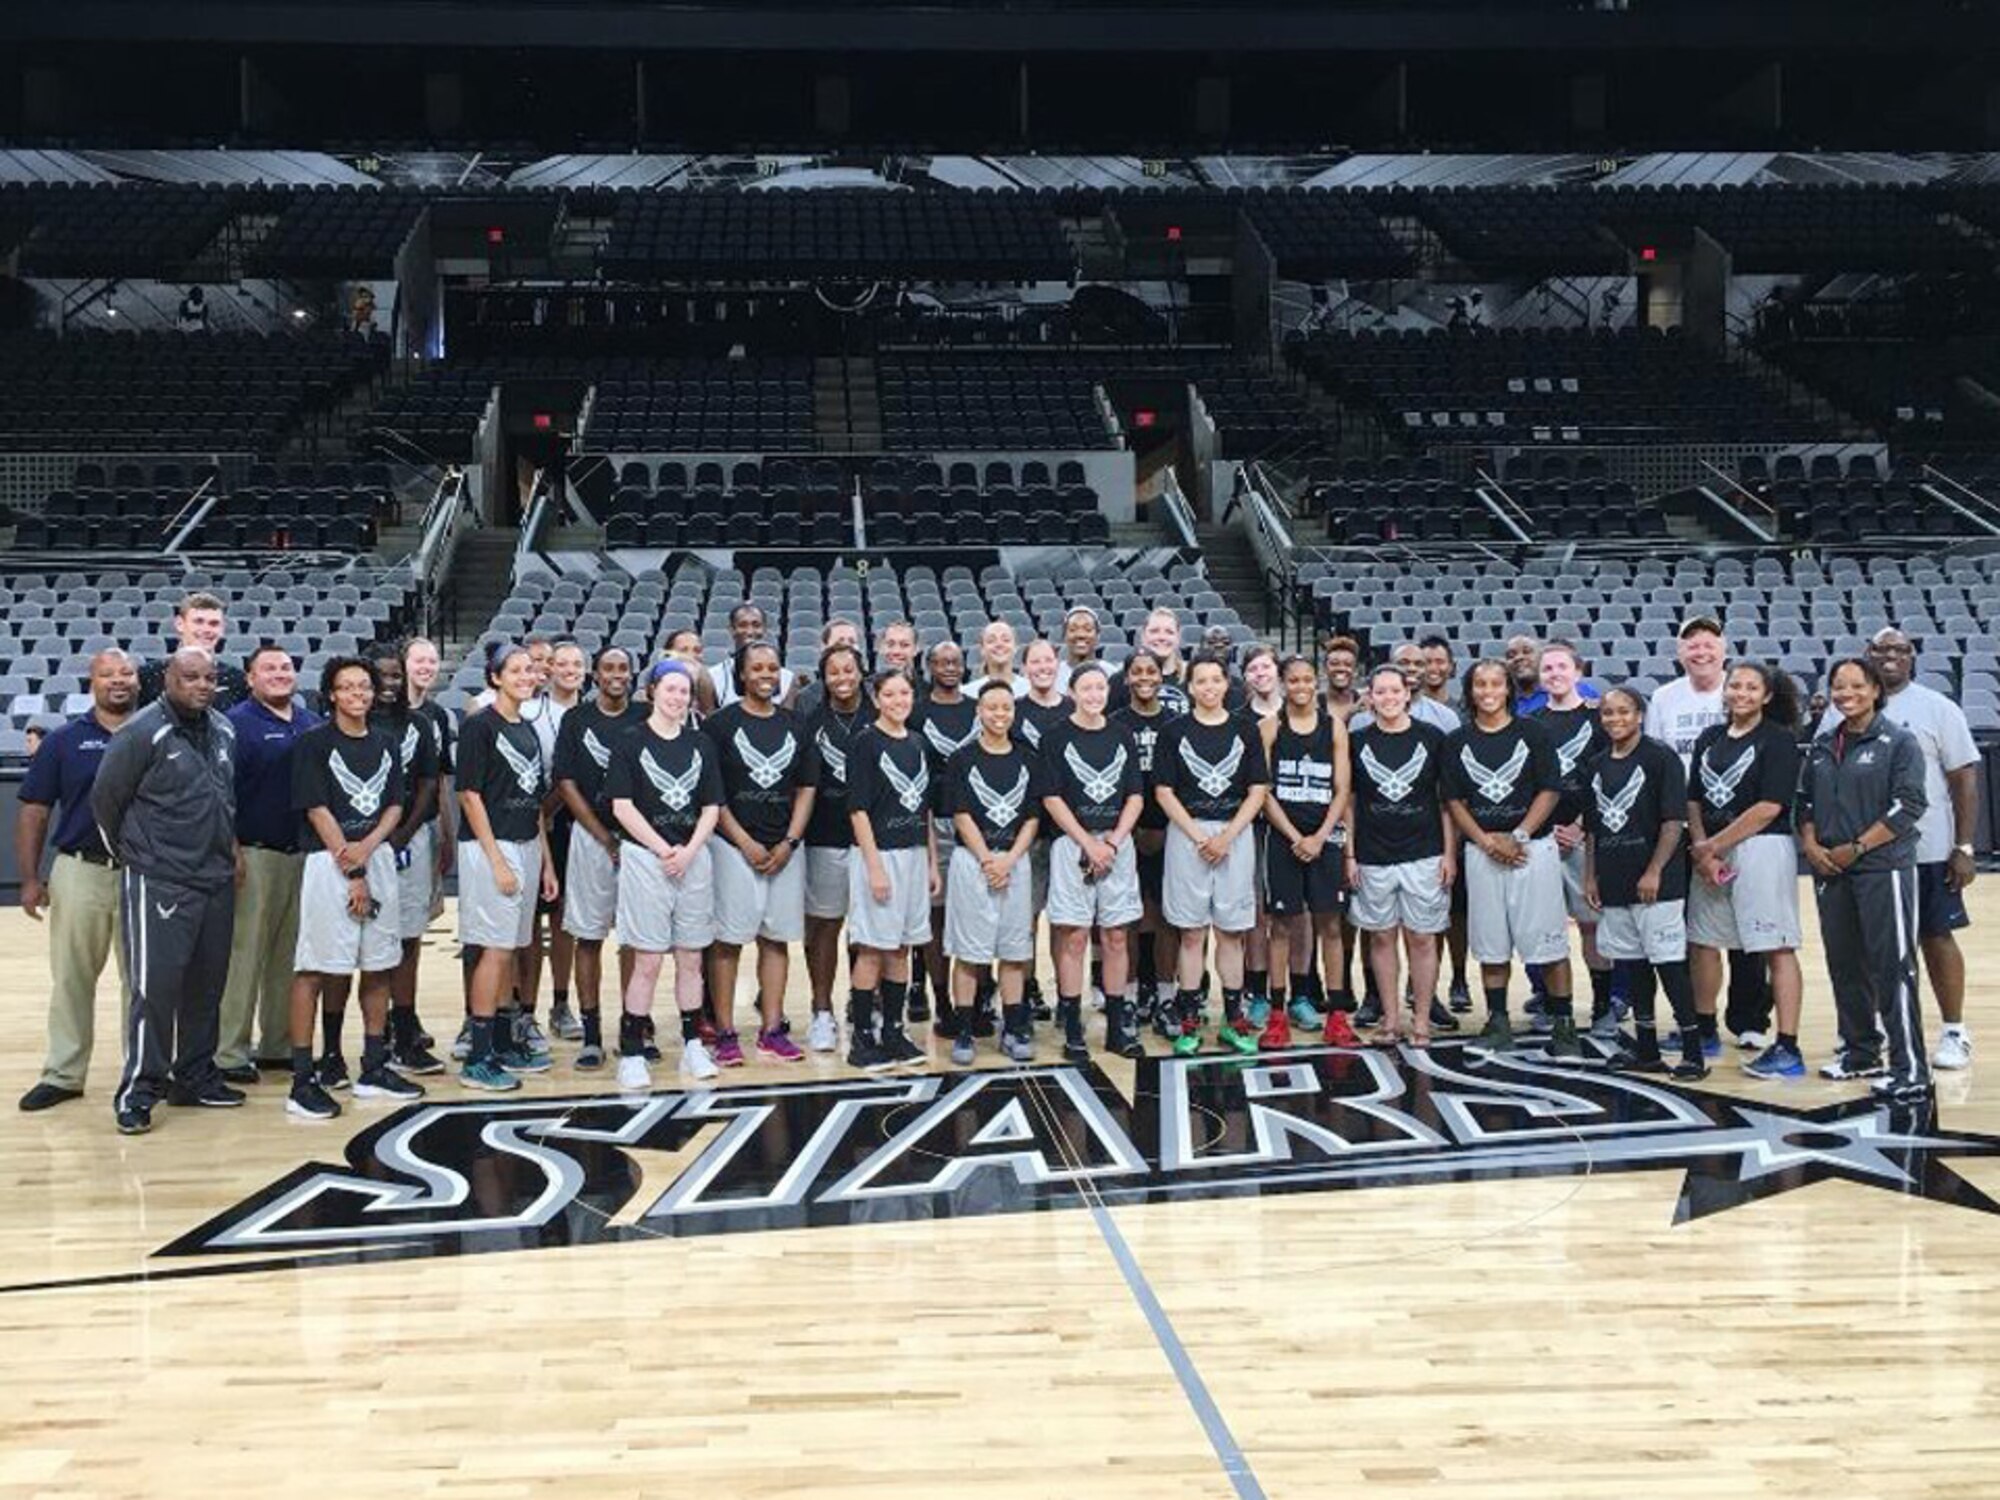 The U.S. Air Force Women’s Basketball Team poses for a picture at the AT&T Center in San Antonio, Texas. Twelve women were selected to play for the team, which will compete in an Armed Forces Tournament over the 4th of July weekend. (Courtesy photo)